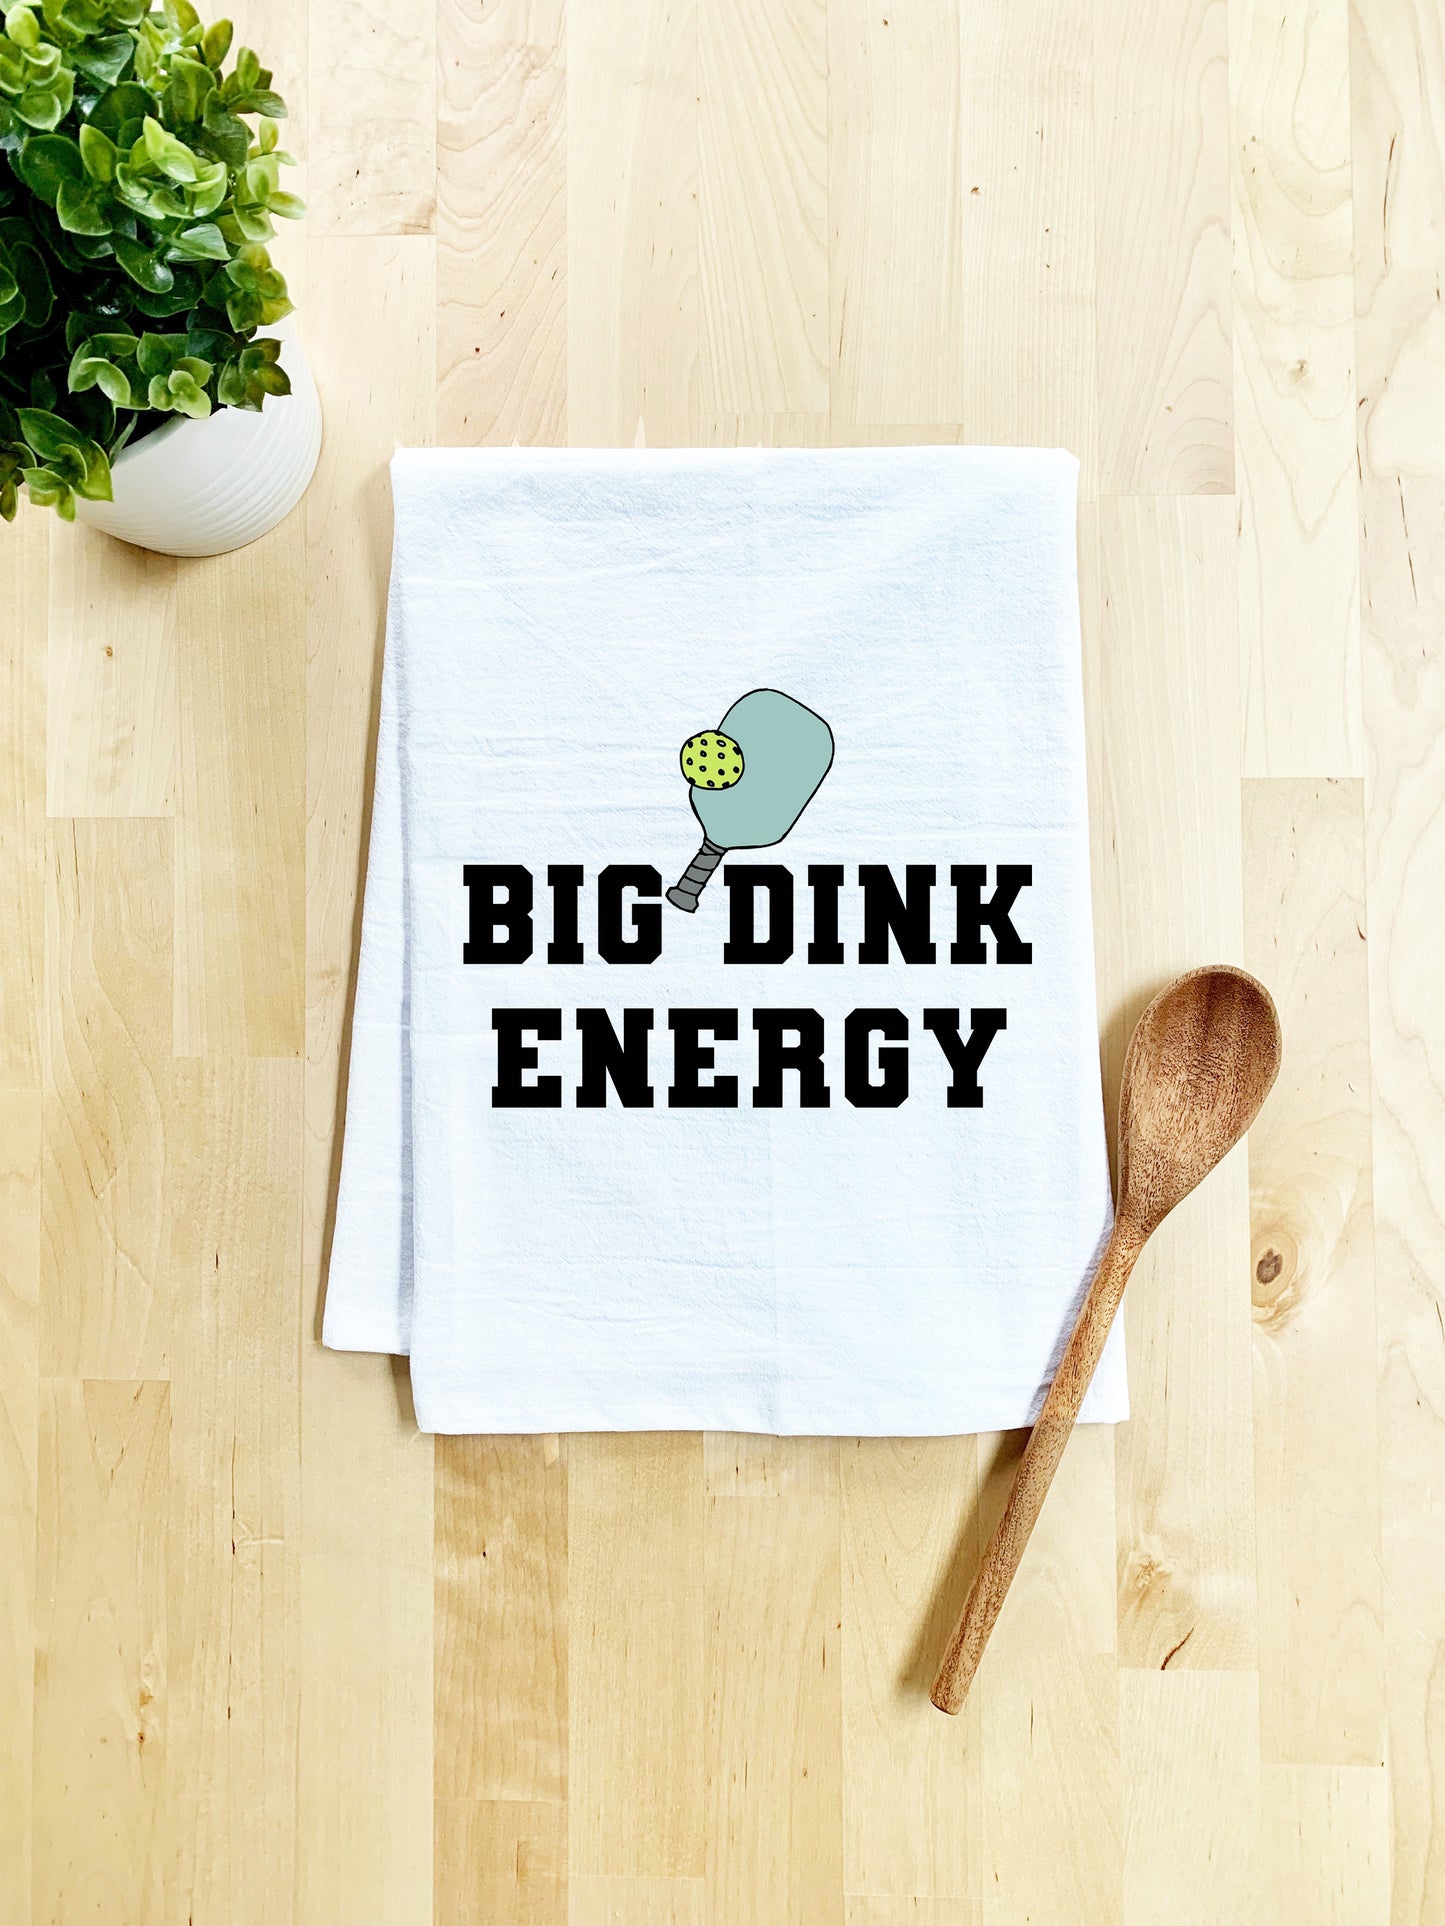 a dish towel that says big dink energy next to a wooden spoon